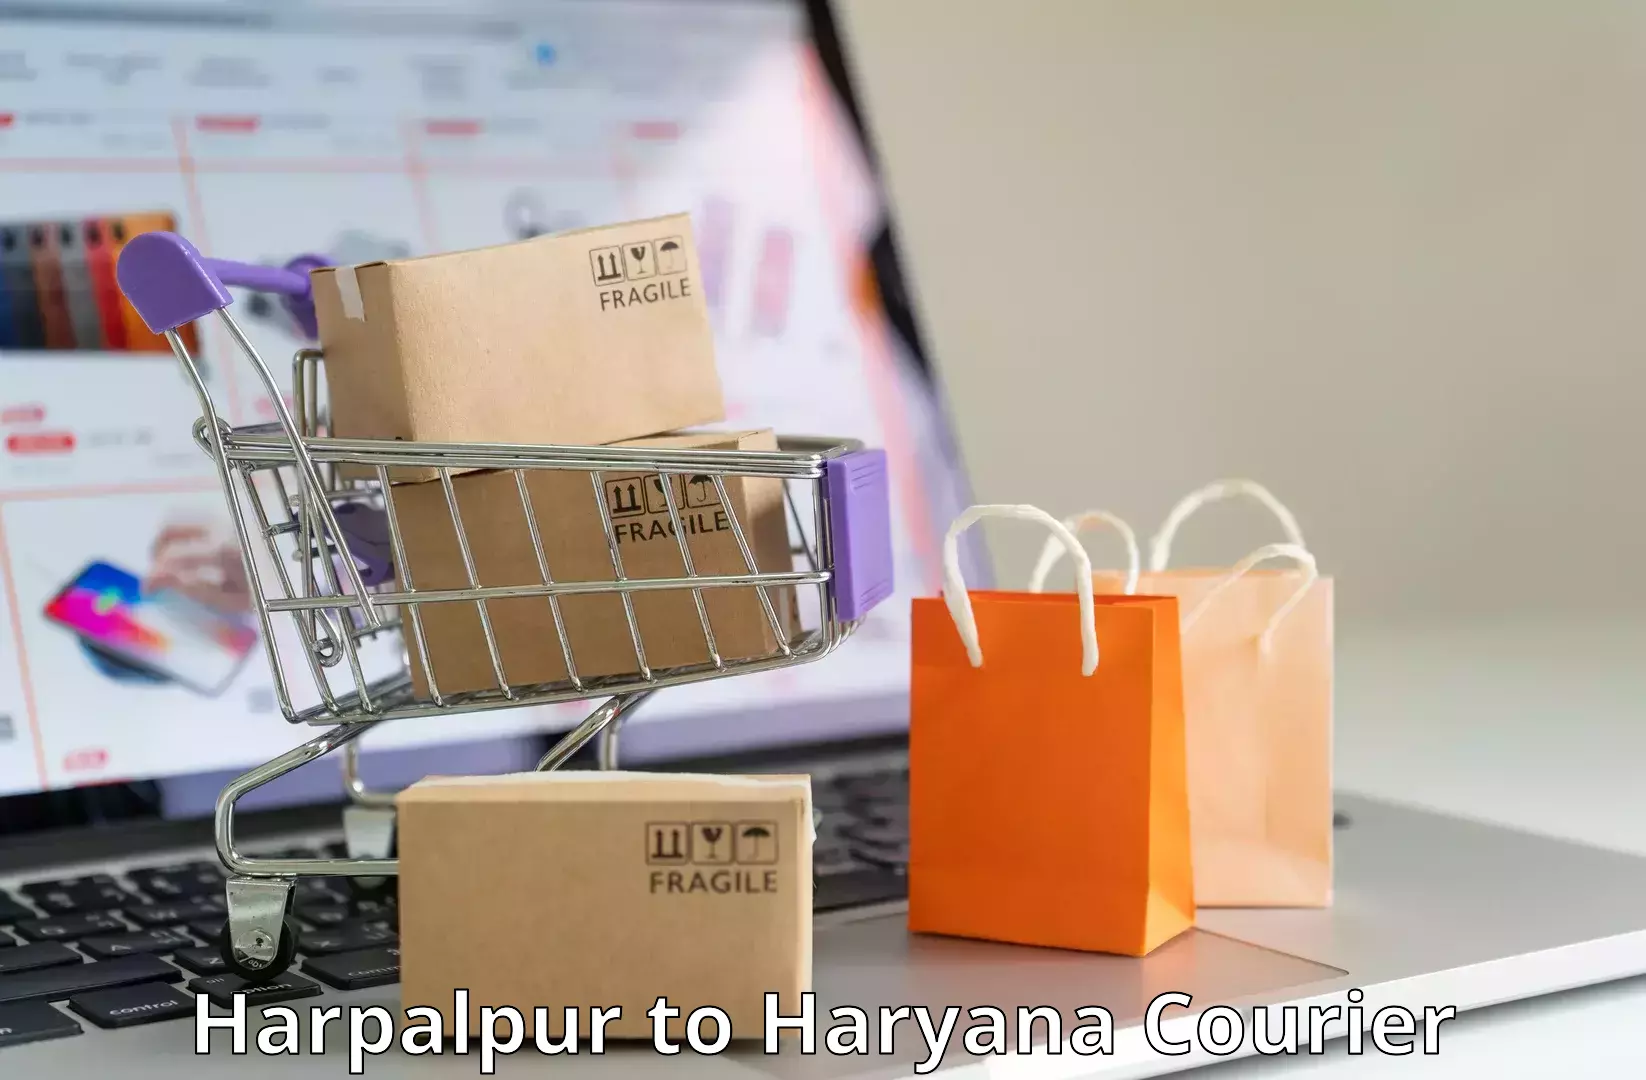 Smart parcel tracking in Harpalpur to Jhajjar